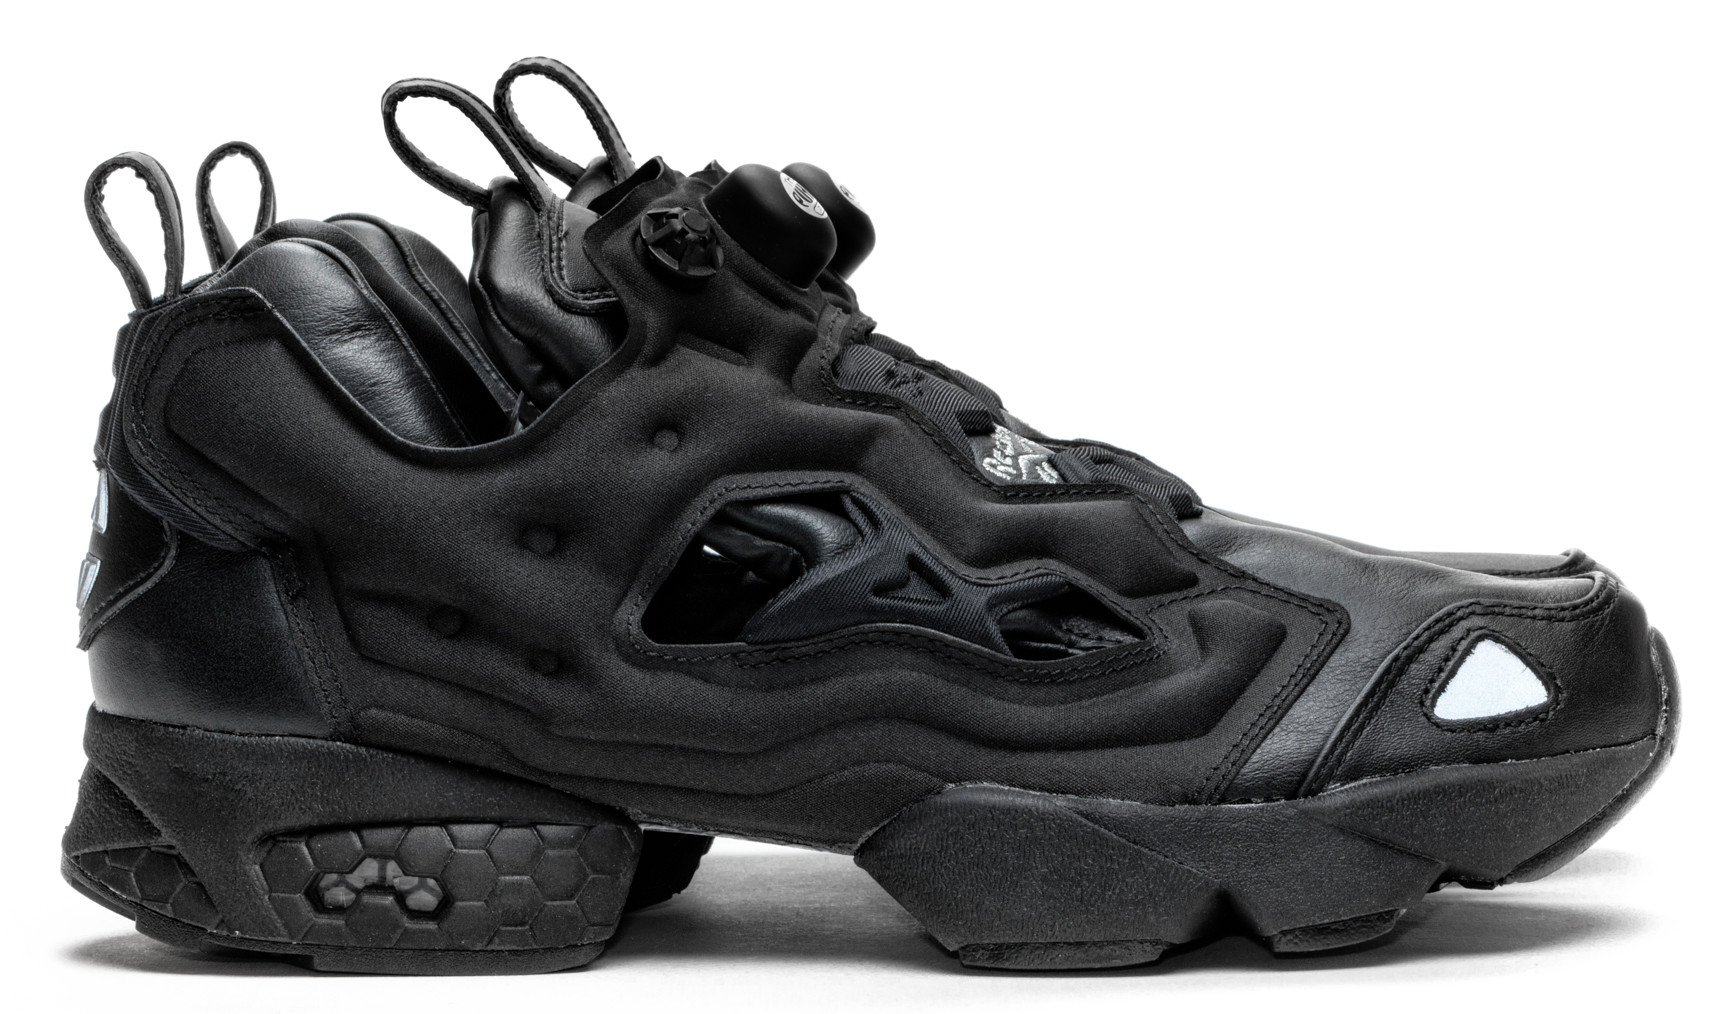 Concepts x Reebok Insta Pump Fury Black Leather Release Date Side